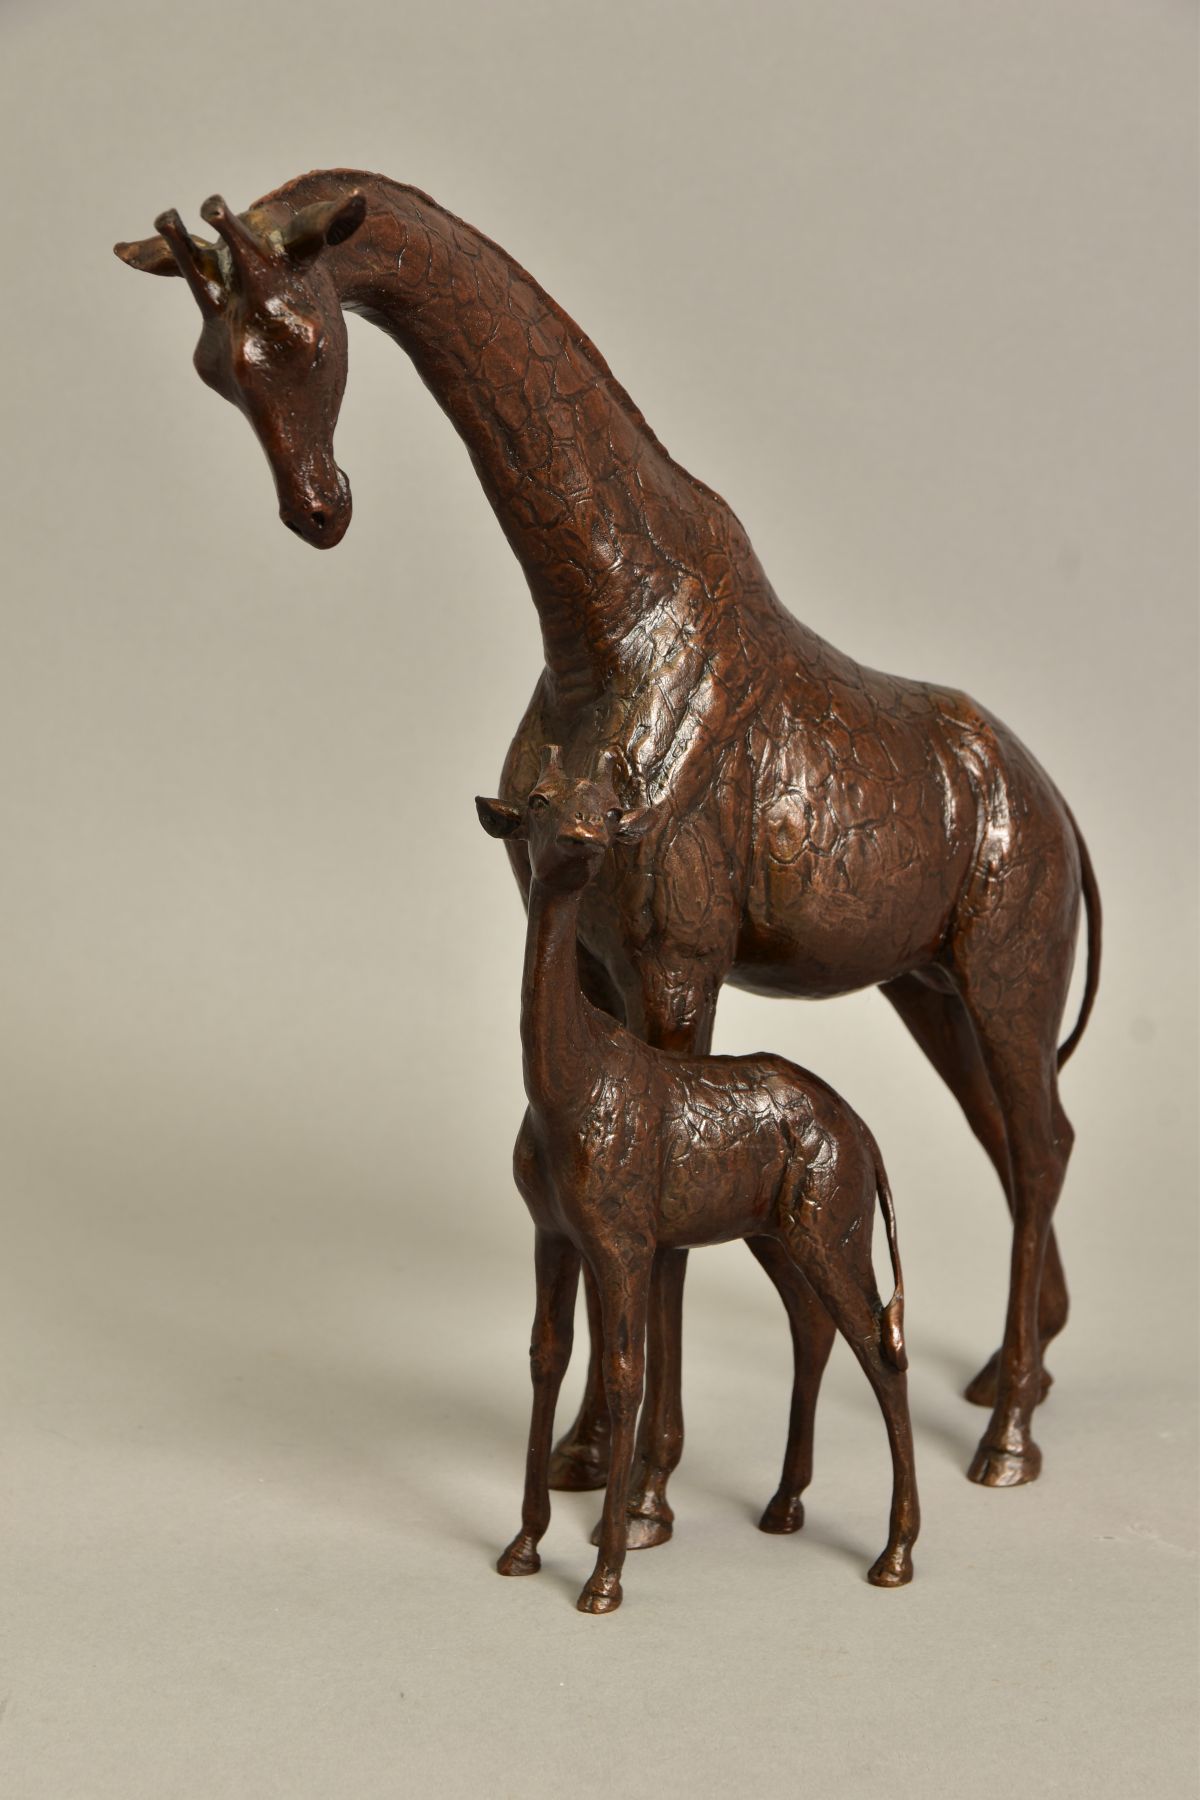 MICHAEL SIMPSON (BRITISH CONTEMPORARY) 'HIGH HOPES', a limited edition bronze sculpture of a giraffe - Image 2 of 5